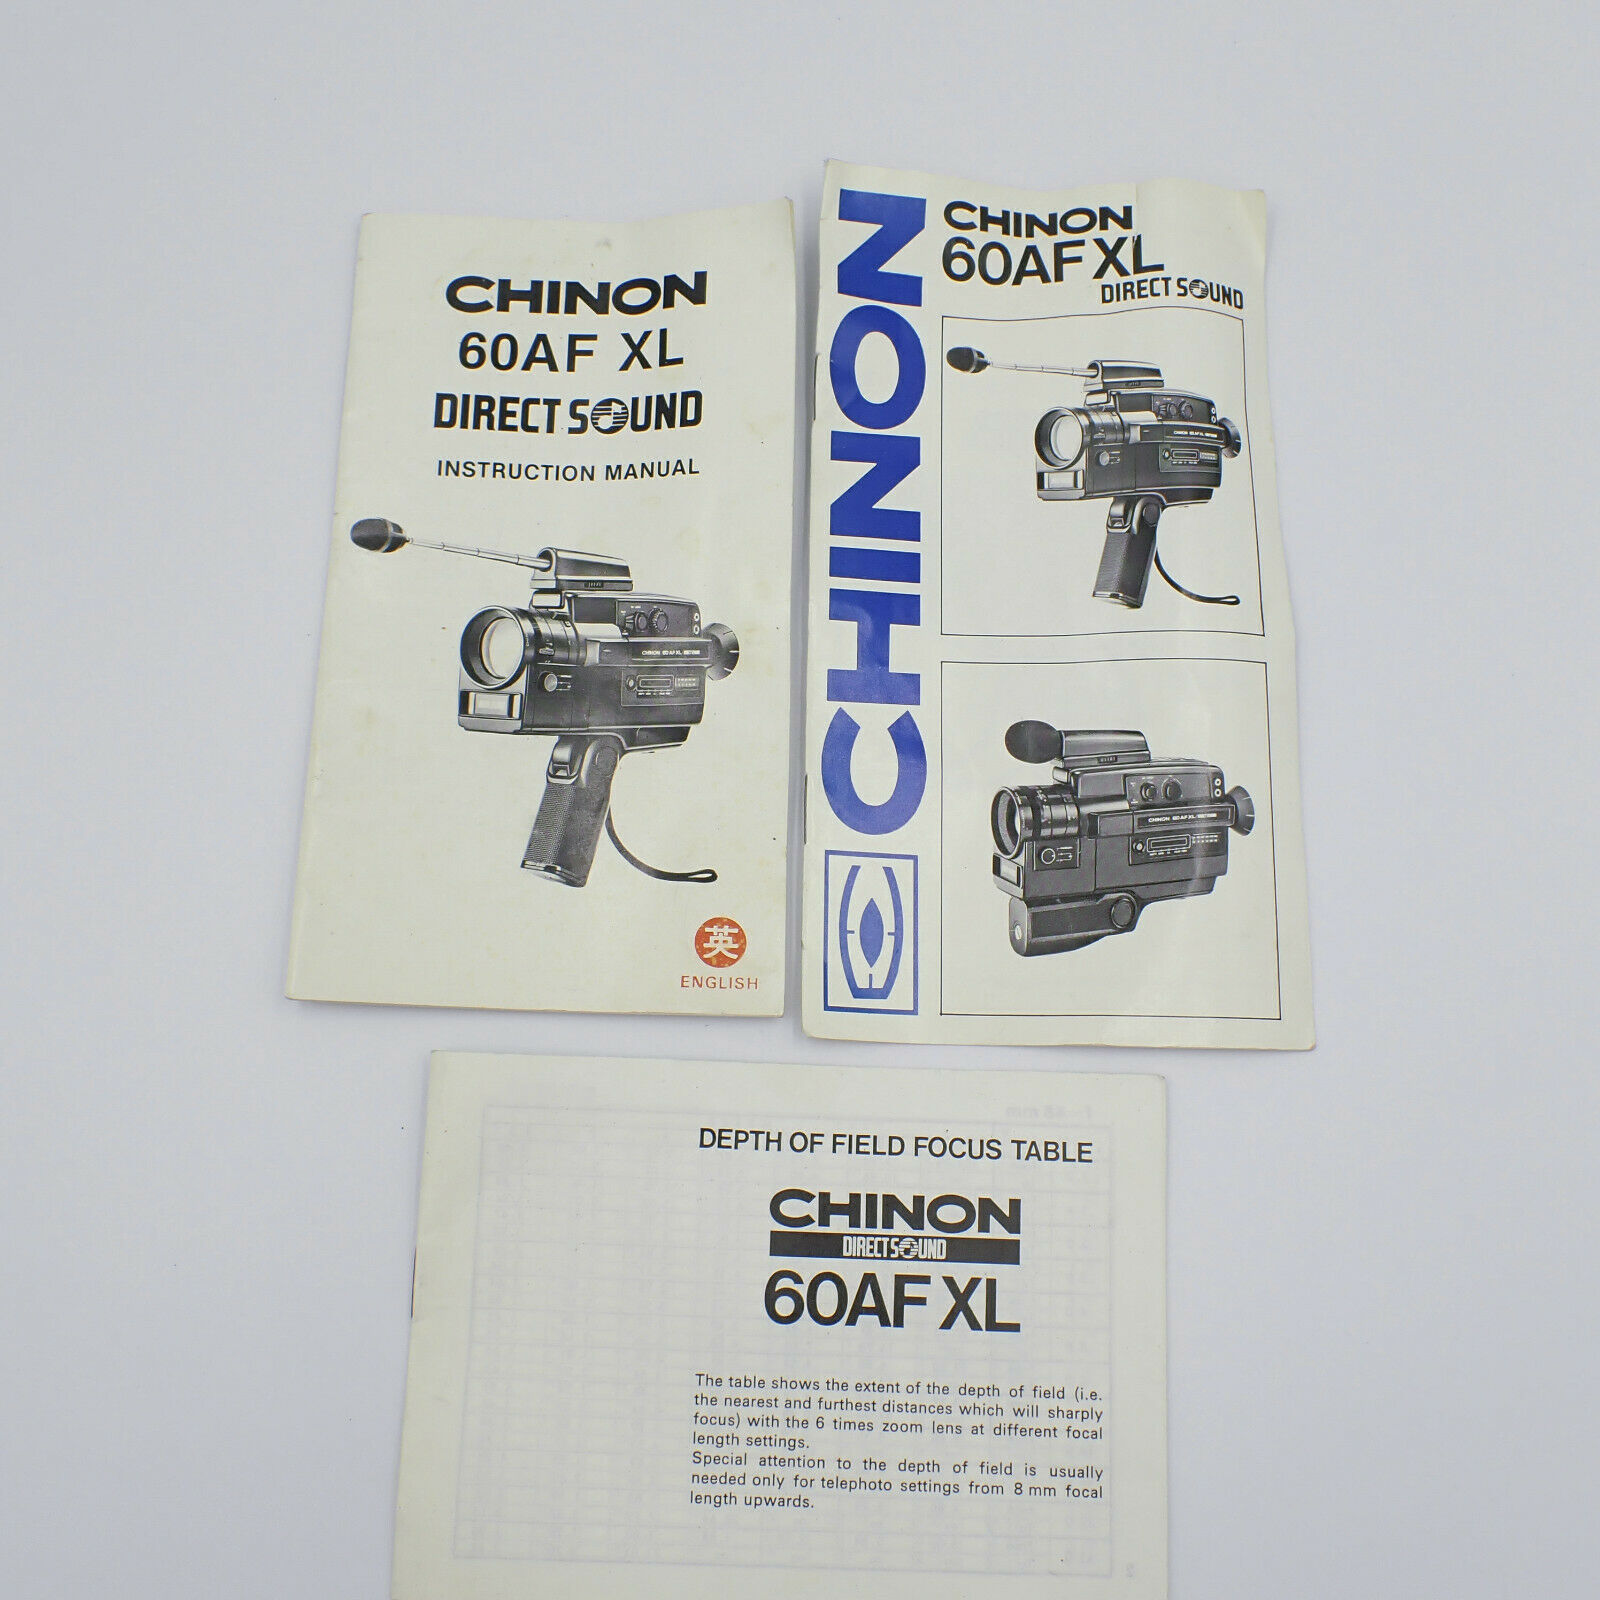 Chinon 60AF XL Direct Sound Instruction Manual C49036